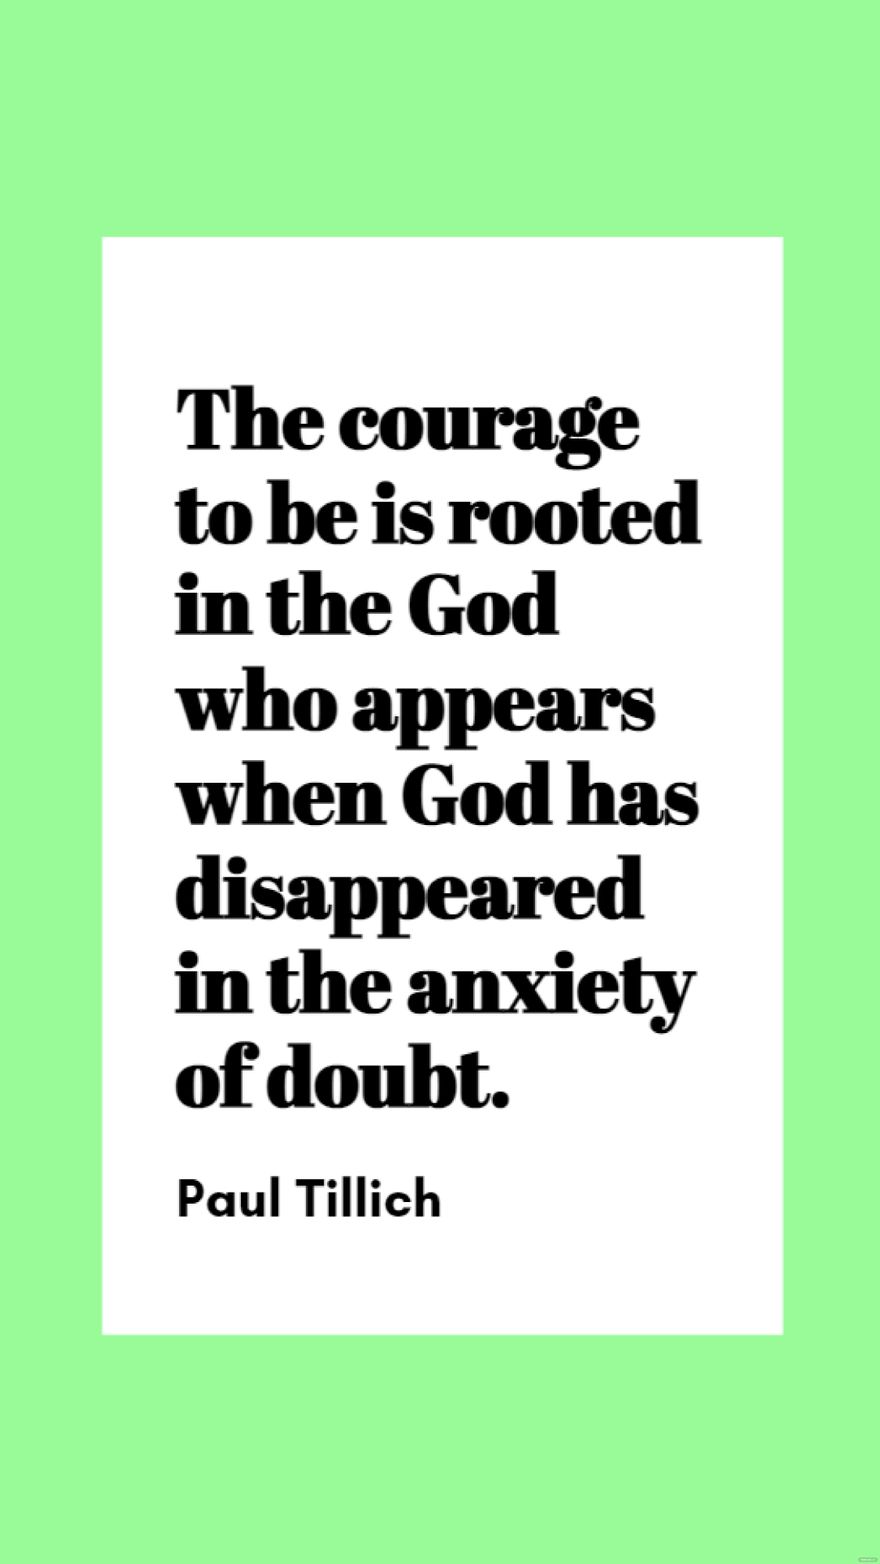 Paul Tillich - The courage to be is rooted in the God who appears when God has disappeared in the anxiety of doubt.